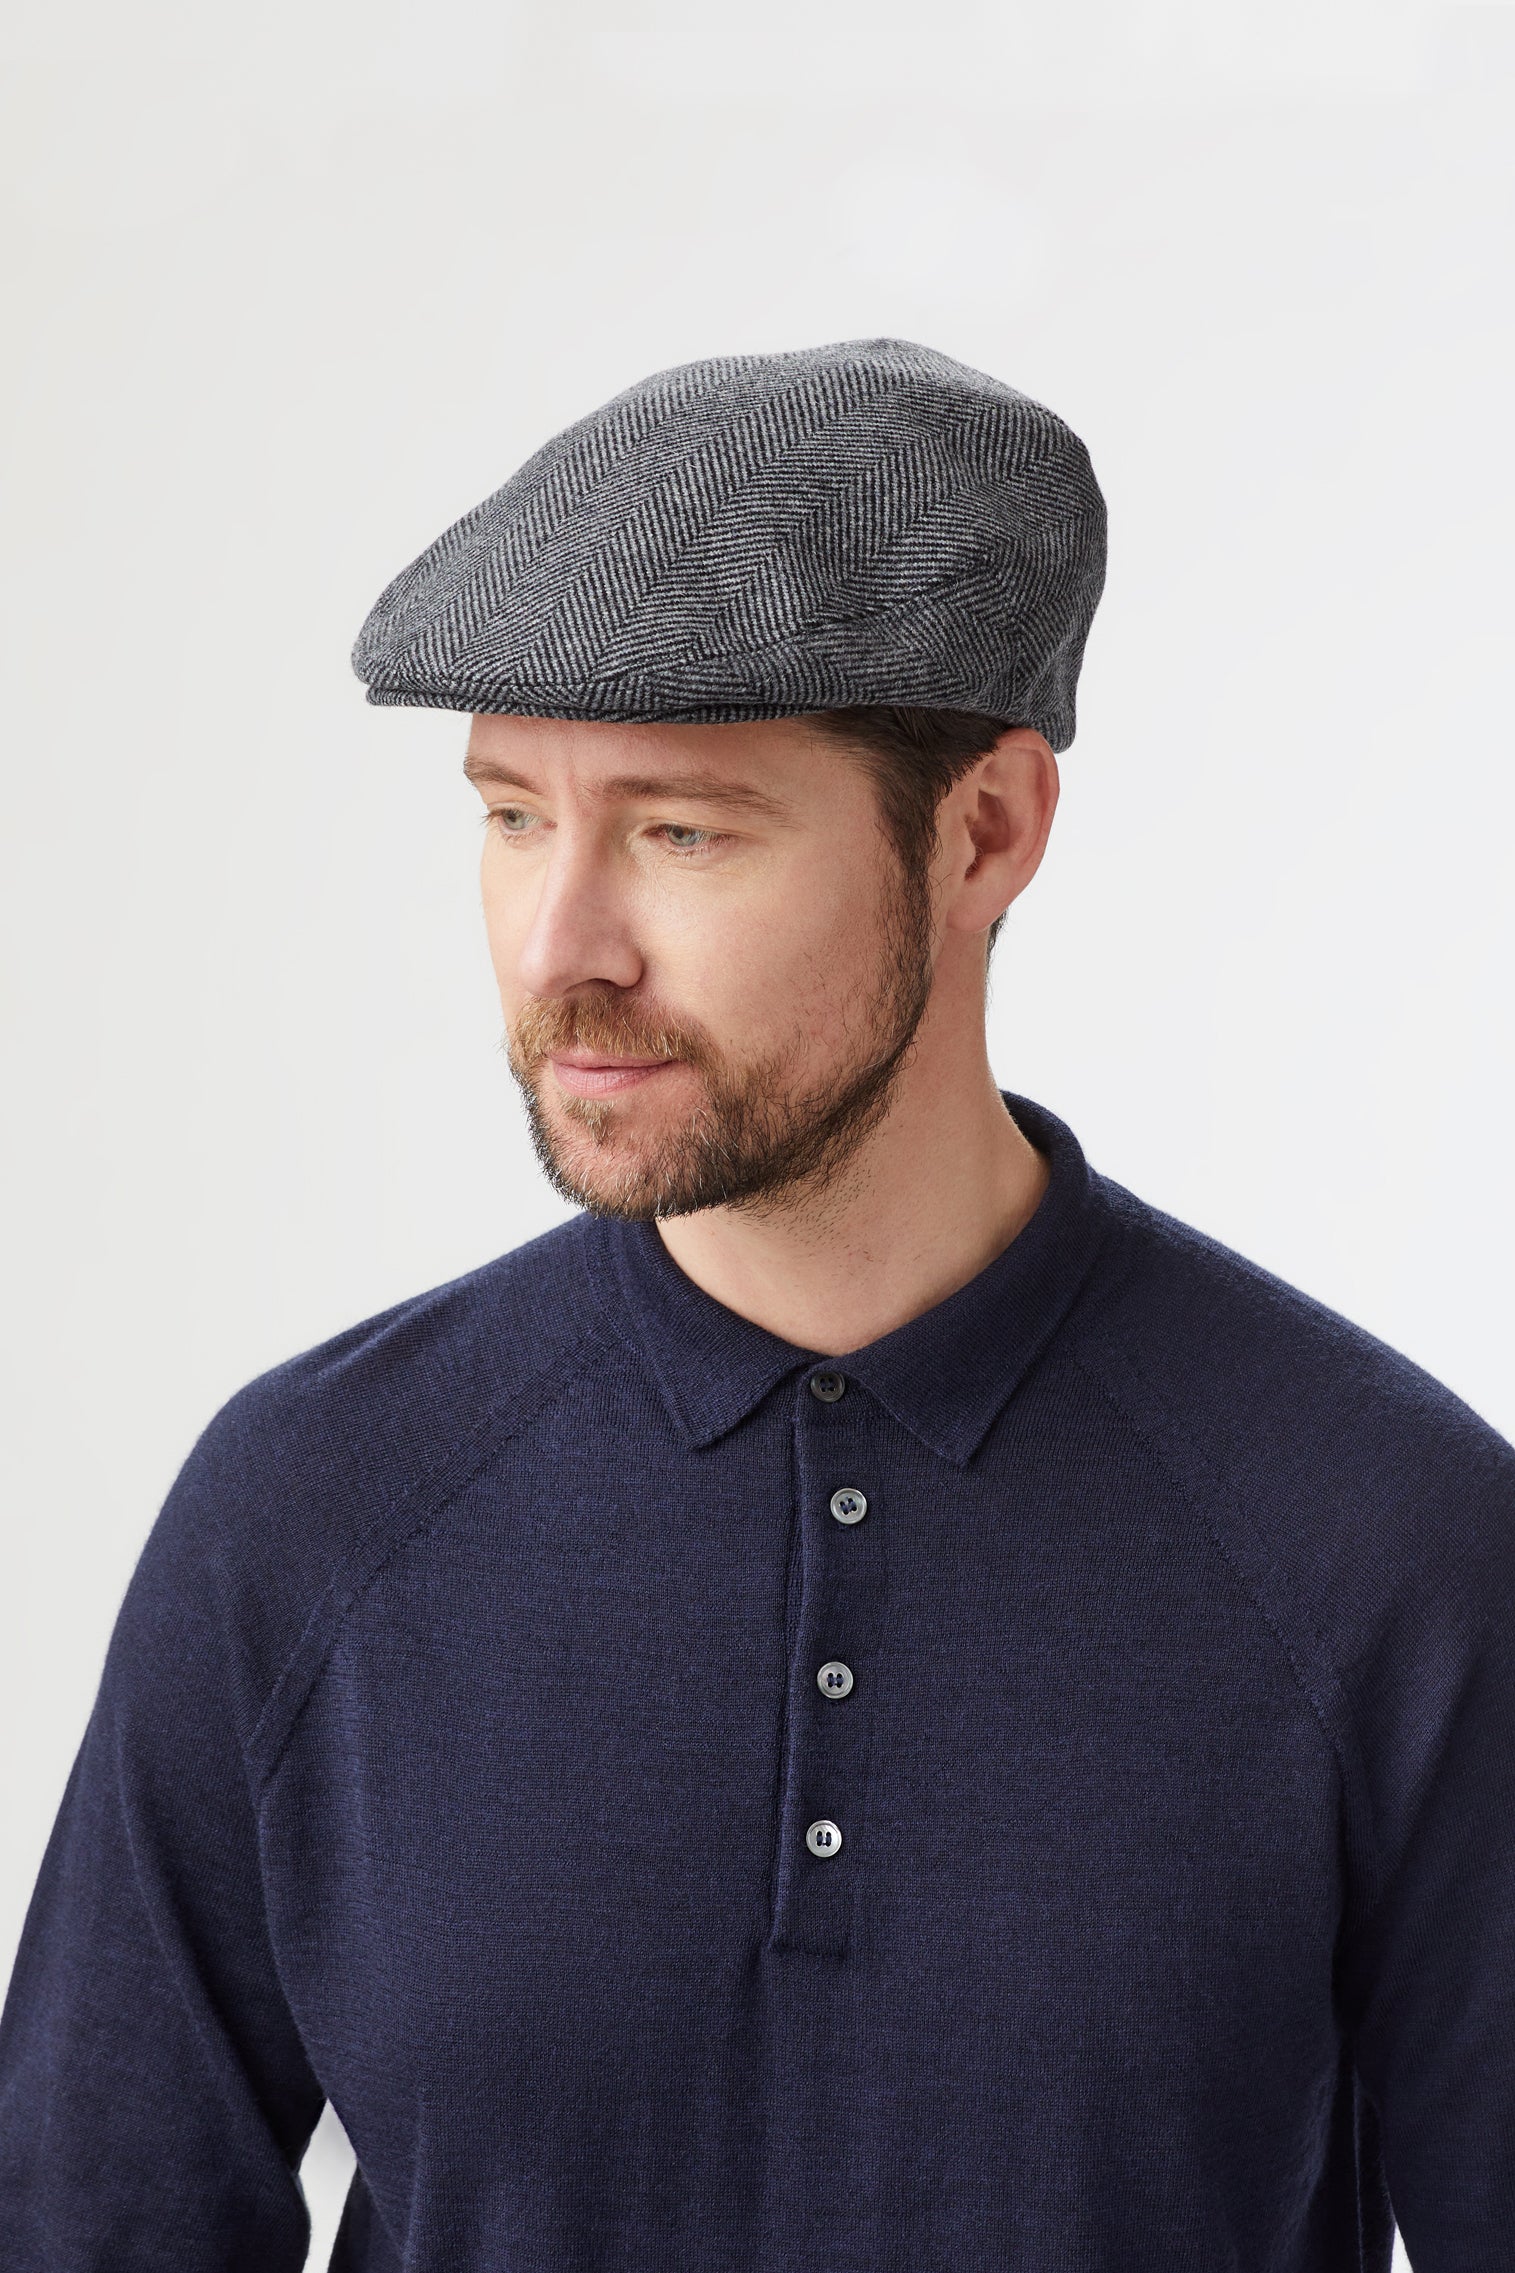 Gill flat cap - You May Also Like - Lock & Co. Hatters London UK